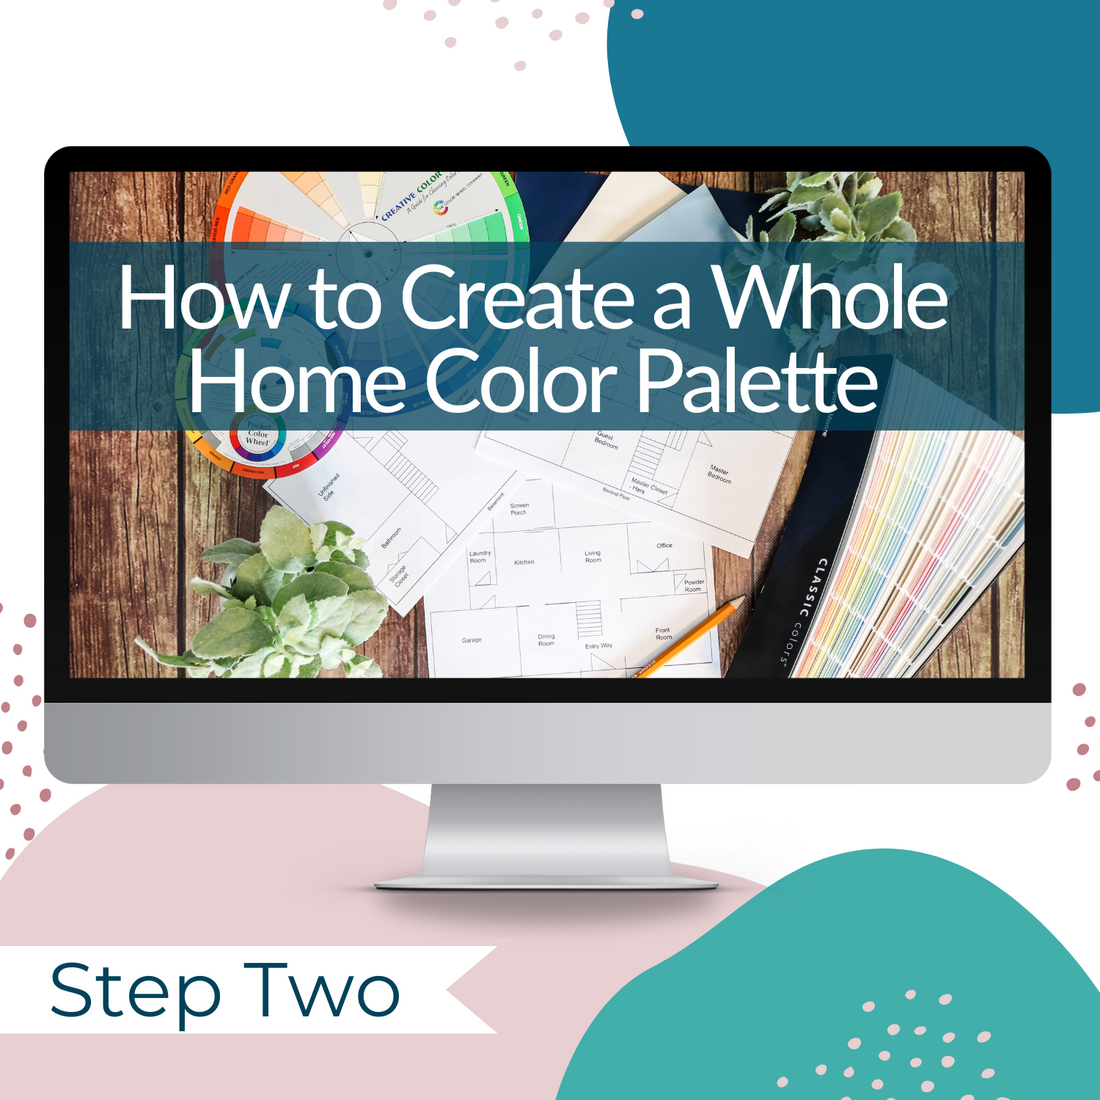 Step two in creating a cohesive color scheme for your whole home is through the My Homier Home How to Create a Whole Home Color Palette Workshop.